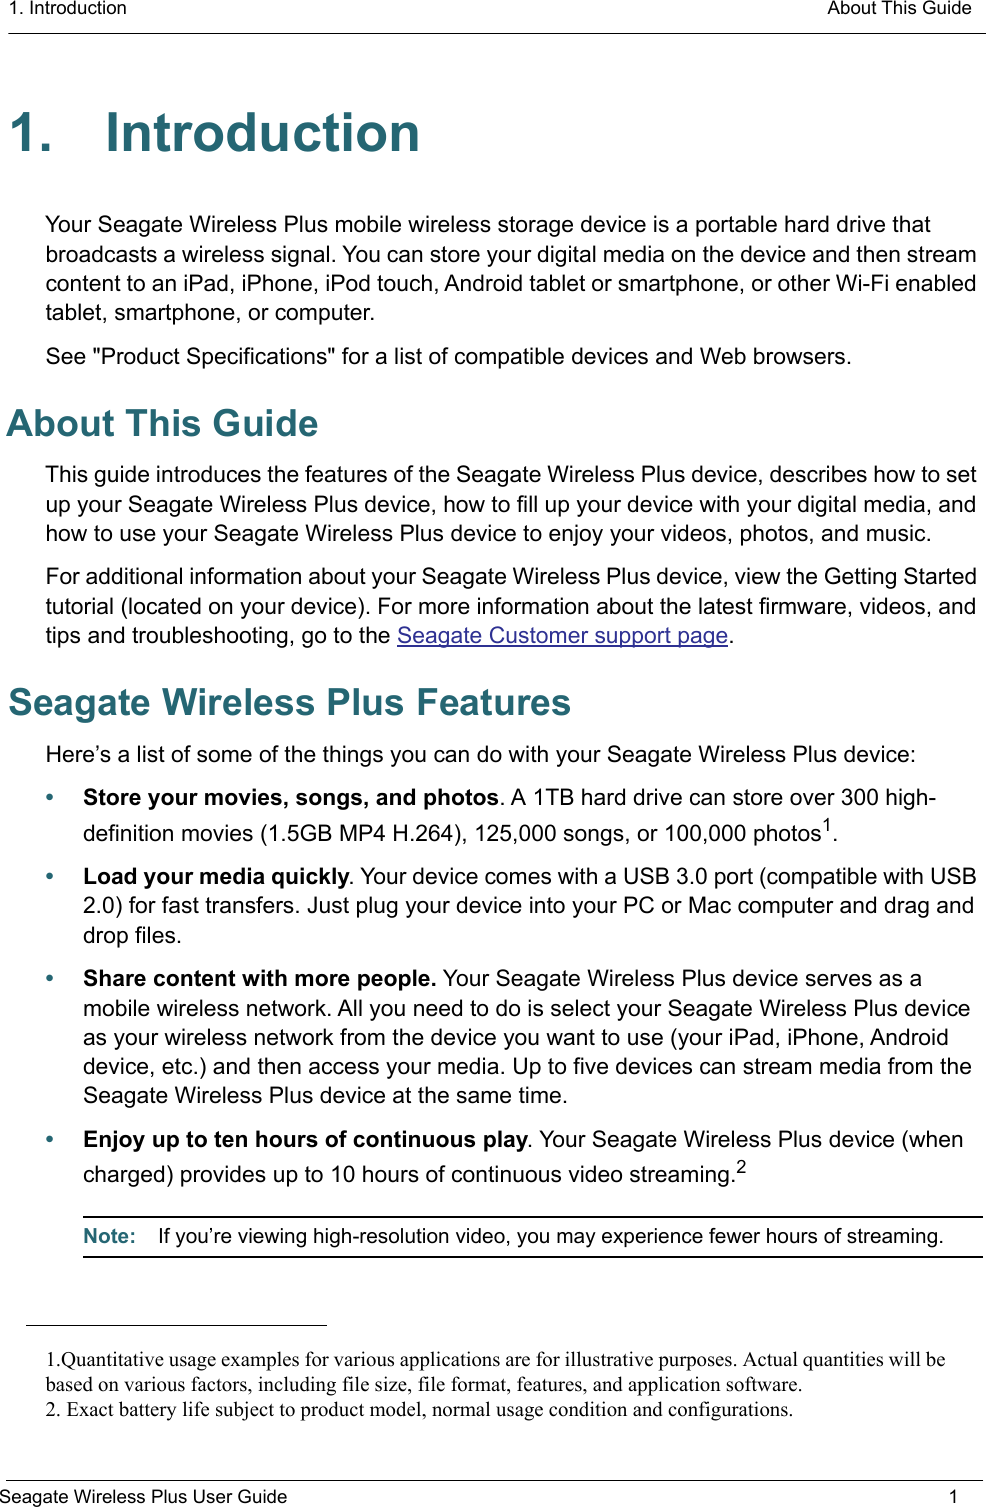 1. Introduction  About This GuideSeagate Wireless Plus User Guide 11. IntroductionYour Seagate Wireless Plus mobile wireless storage device is a portable hard drive that broadcasts a wireless signal. You can store your digital media on the device and then stream content to an iPad, iPhone, iPod touch, Android tablet or smartphone, or other Wi-Fi enabled tablet, smartphone, or computer. See &quot;Product Specifications&quot; for a list of compatible devices and Web browsers.About This GuideThis guide introduces the features of the Seagate Wireless Plus device, describes how to set up your Seagate Wireless Plus device, how to fill up your device with your digital media, and how to use your Seagate Wireless Plus device to enjoy your videos, photos, and music.For additional information about your Seagate Wireless Plus device, view the Getting Started tutorial (located on your device). For more information about the latest firmware, videos, and tips and troubleshooting, go to the Seagate Customer support page. Seagate Wireless Plus FeaturesHere’s a list of some of the things you can do with your Seagate Wireless Plus device:•Store your movies, songs, and photos. A 1TB hard drive can store over 300 high- definition movies (1.5GB MP4 H.264), 125,000 songs, or 100,000 photos1.•Load your media quickly. Your device comes with a USB 3.0 port (compatible with USB 2.0) for fast transfers. Just plug your device into your PC or Mac computer and drag and drop files.•Share content with more people. Your Seagate Wireless Plus device serves as a mobile wireless network. All you need to do is select your Seagate Wireless Plus device as your wireless network from the device you want to use (your iPad, iPhone, Android device, etc.) and then access your media. Up to five devices can stream media from the Seagate Wireless Plus device at the same time.•Enjoy up to ten hours of continuous play. Your Seagate Wireless Plus device (when charged) provides up to 10 hours of continuous video streaming.2Note:  If you’re viewing high-resolution video, you may experience fewer hours of streaming.1.Quantitative usage examples for various applications are for illustrative purposes. Actual quantities will bebased on various factors, including file size, file format, features, and application software.2. Exact battery life subject to product model, normal usage condition and configurations.